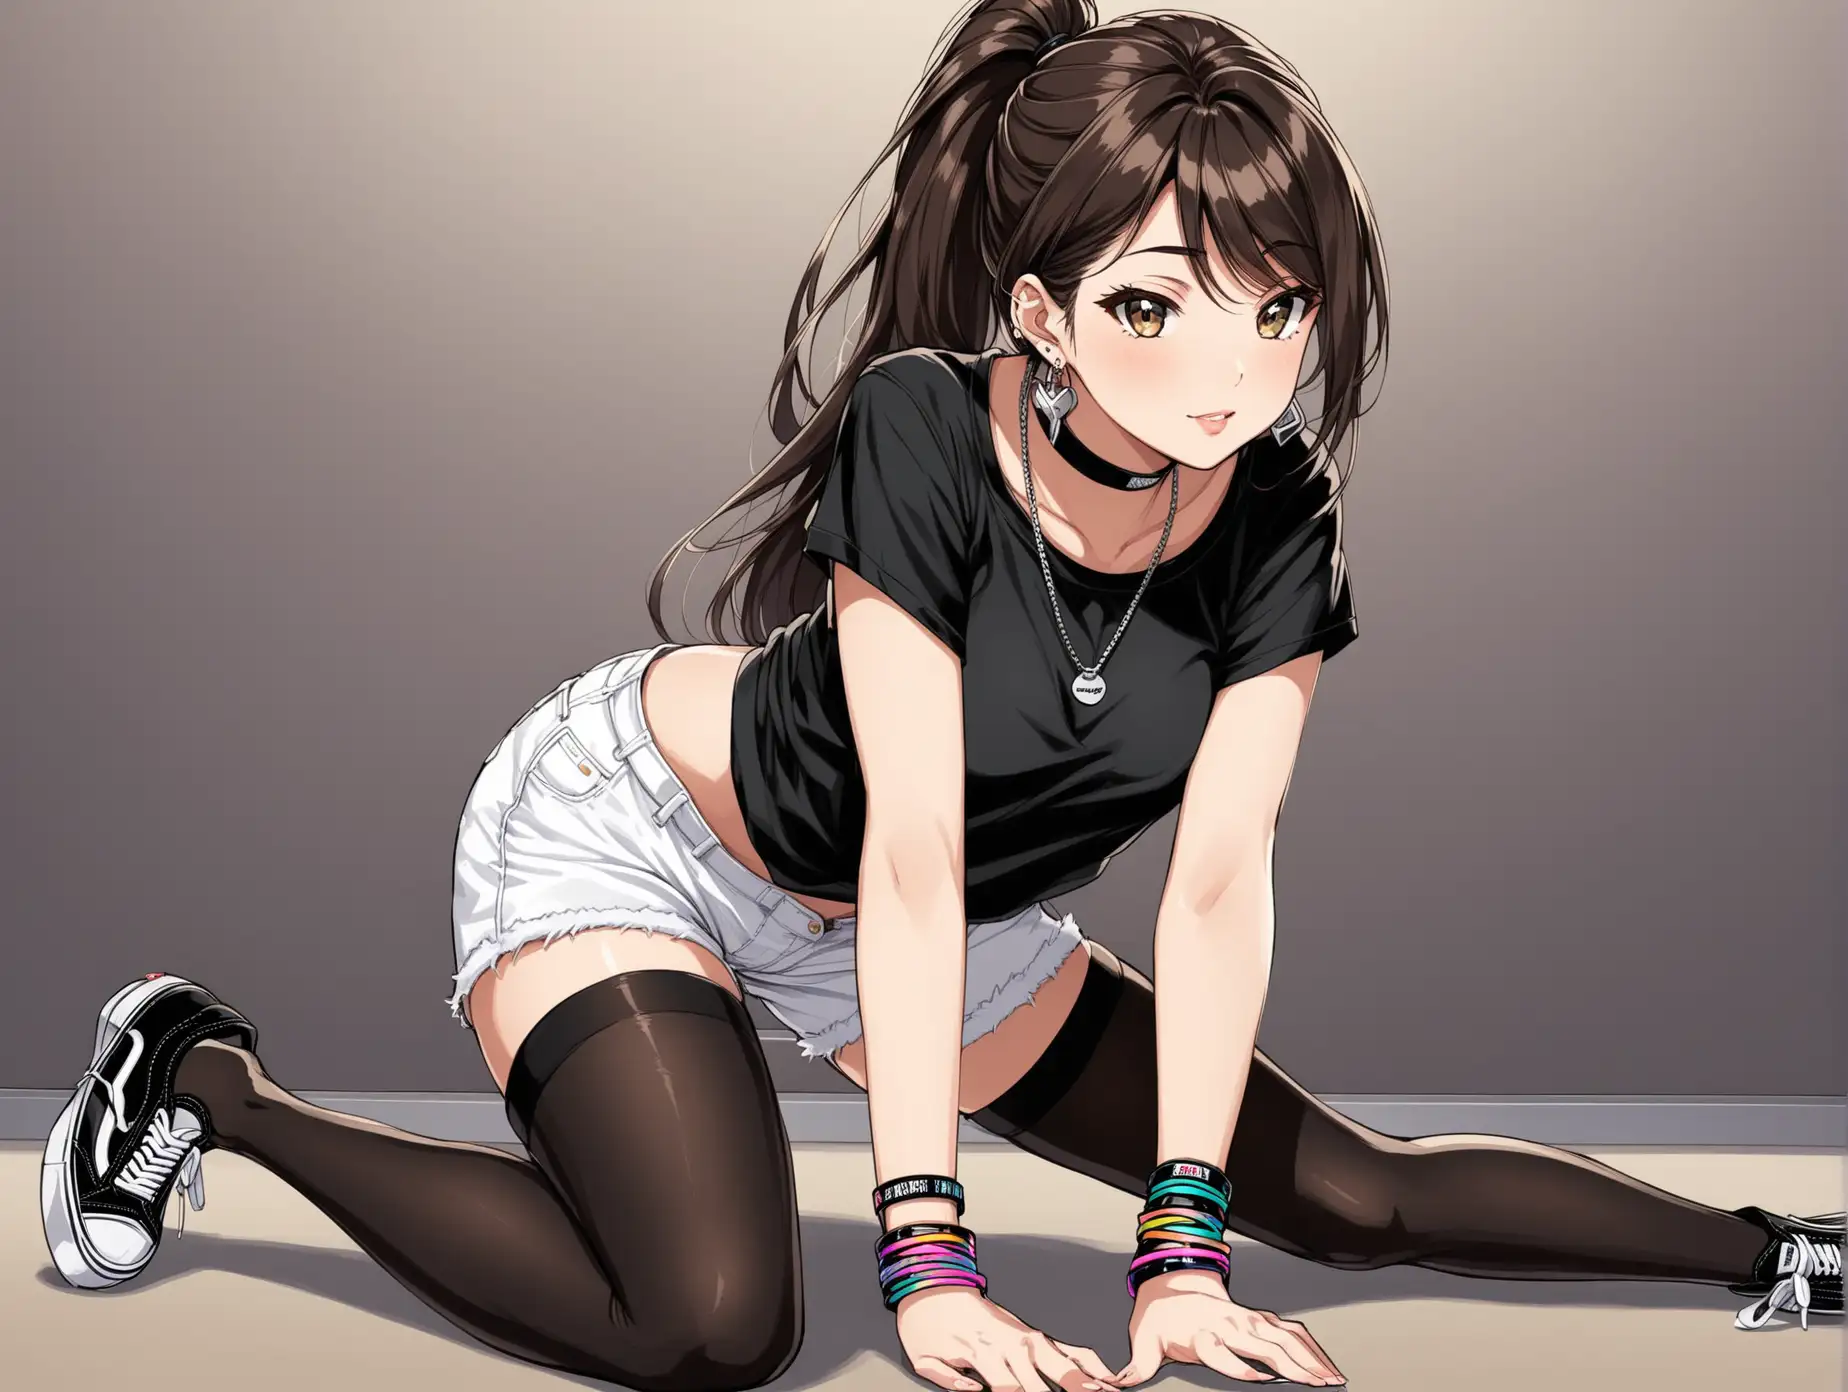 Sultry-Anime-Brunette-in-Doggy-Style-Pose-with-Trendy-Urban-Attire